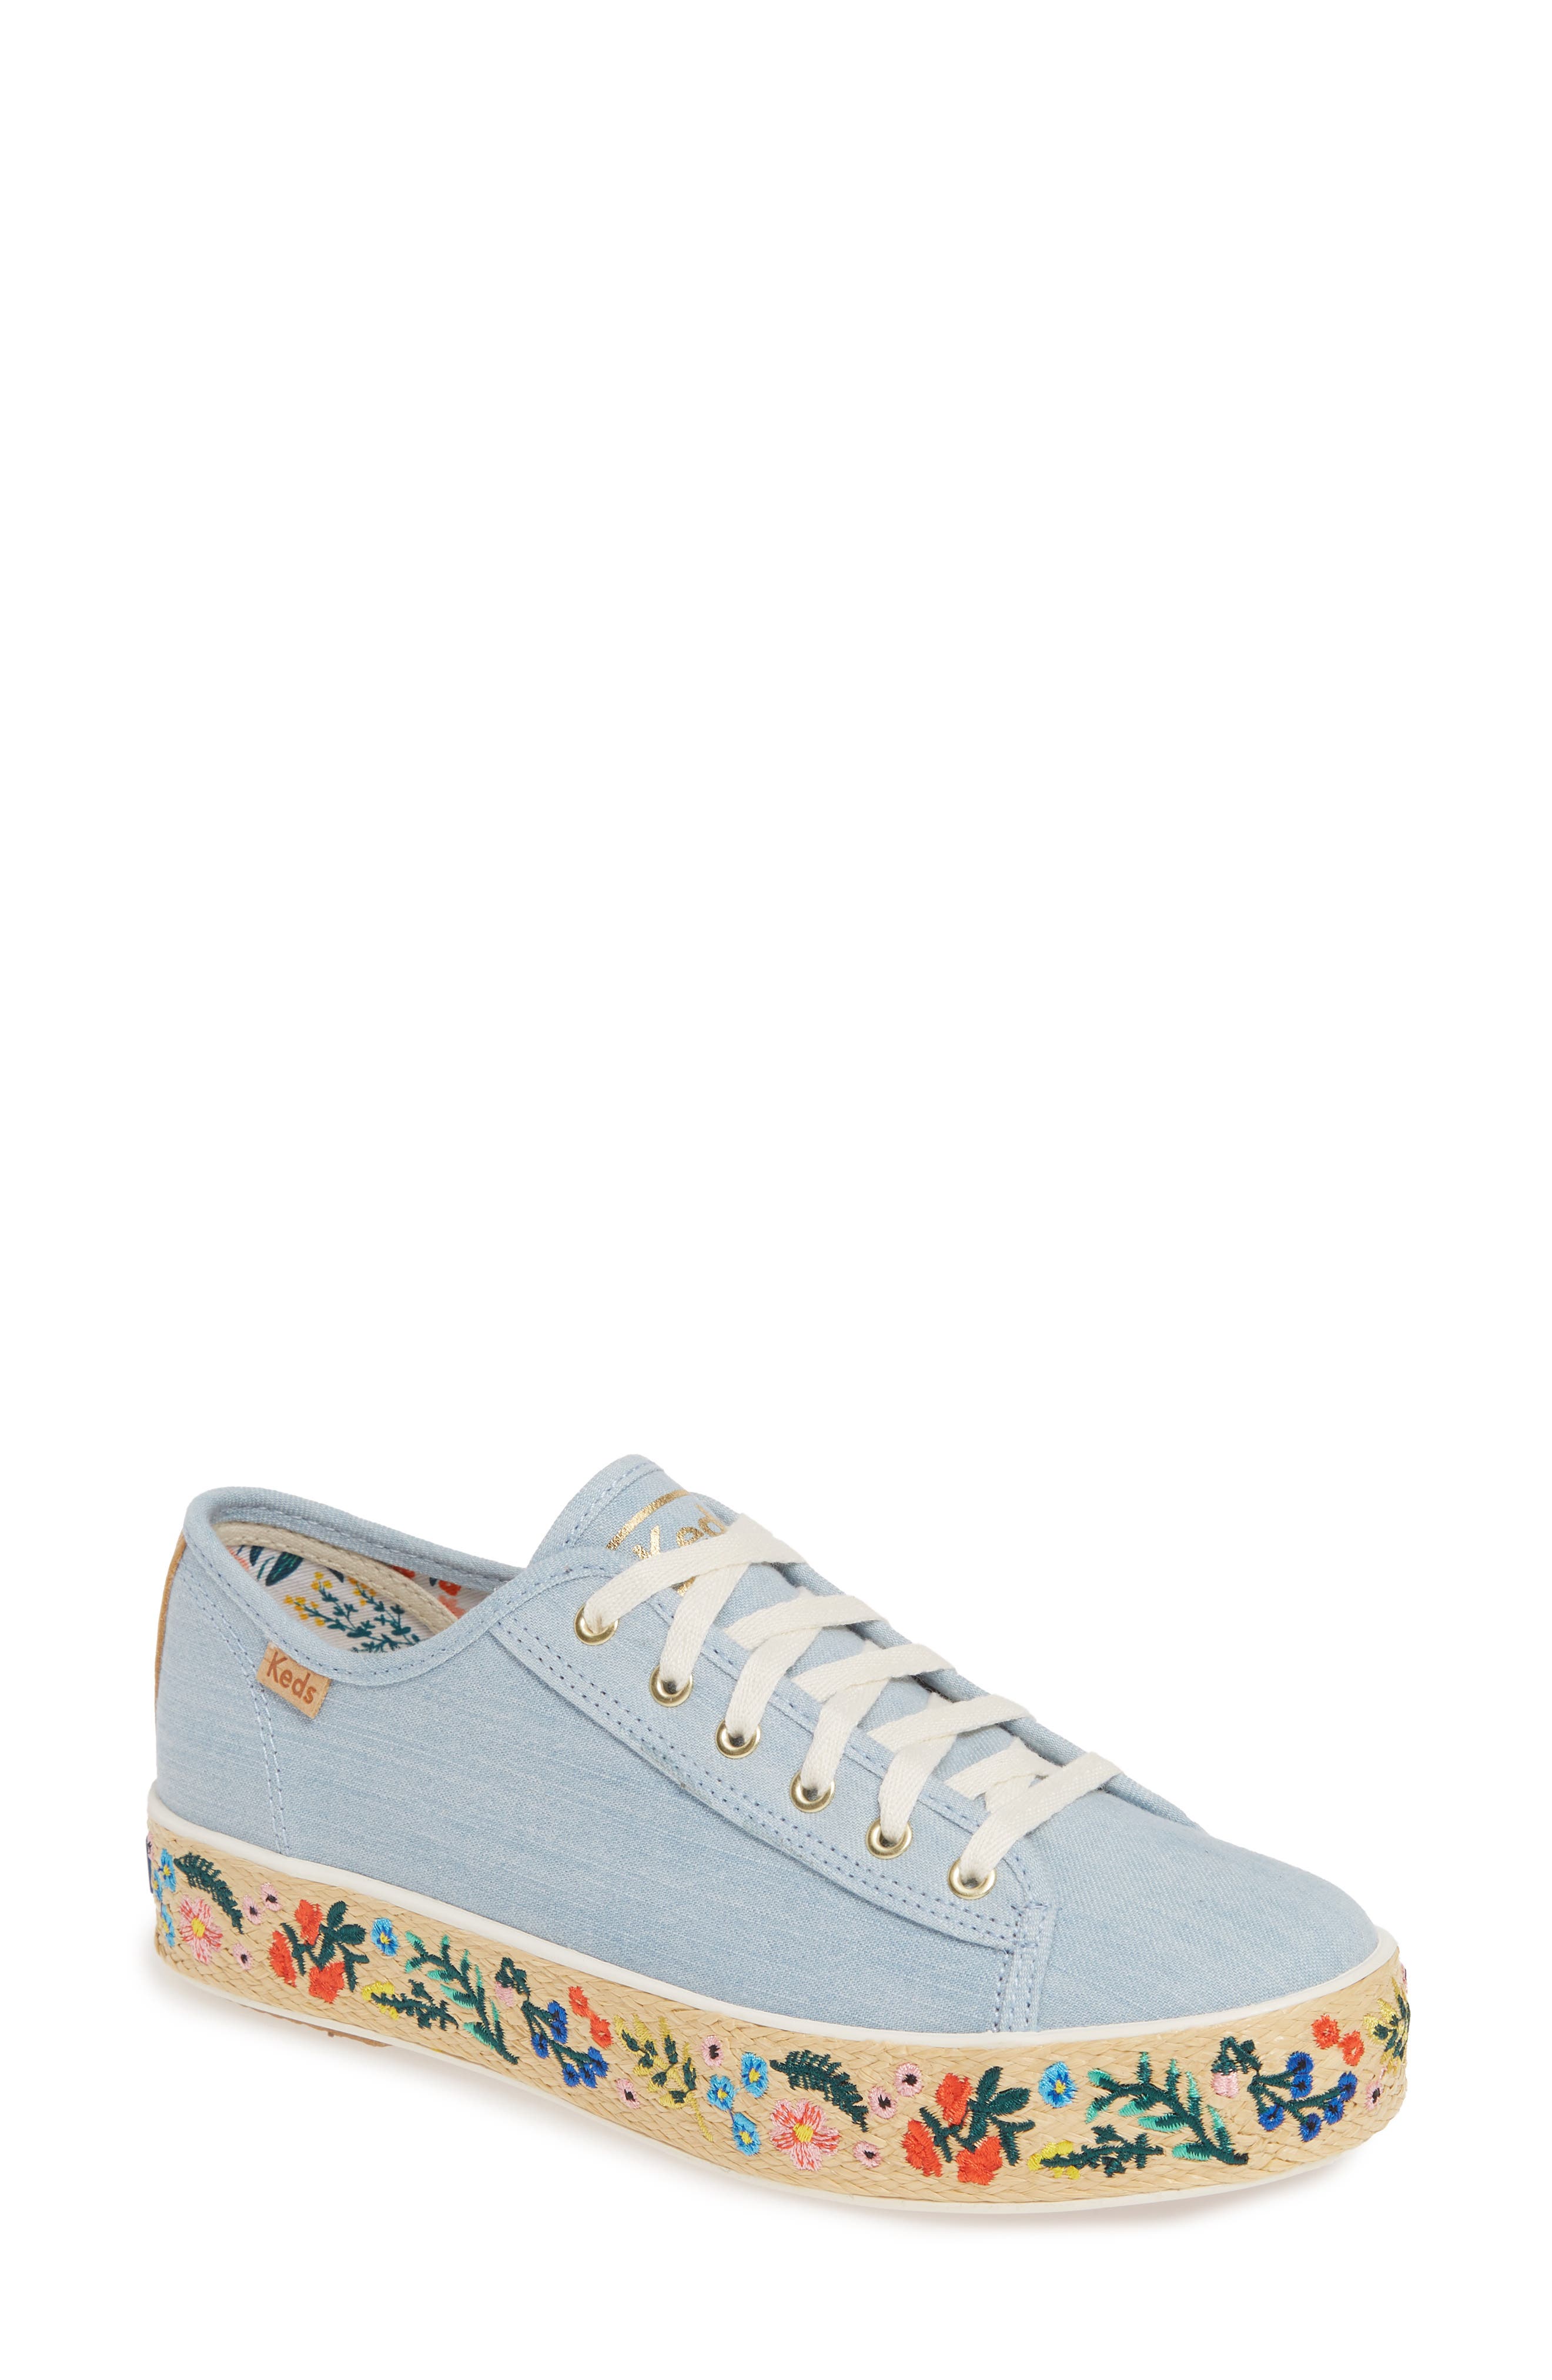 keds rifle paper co canada